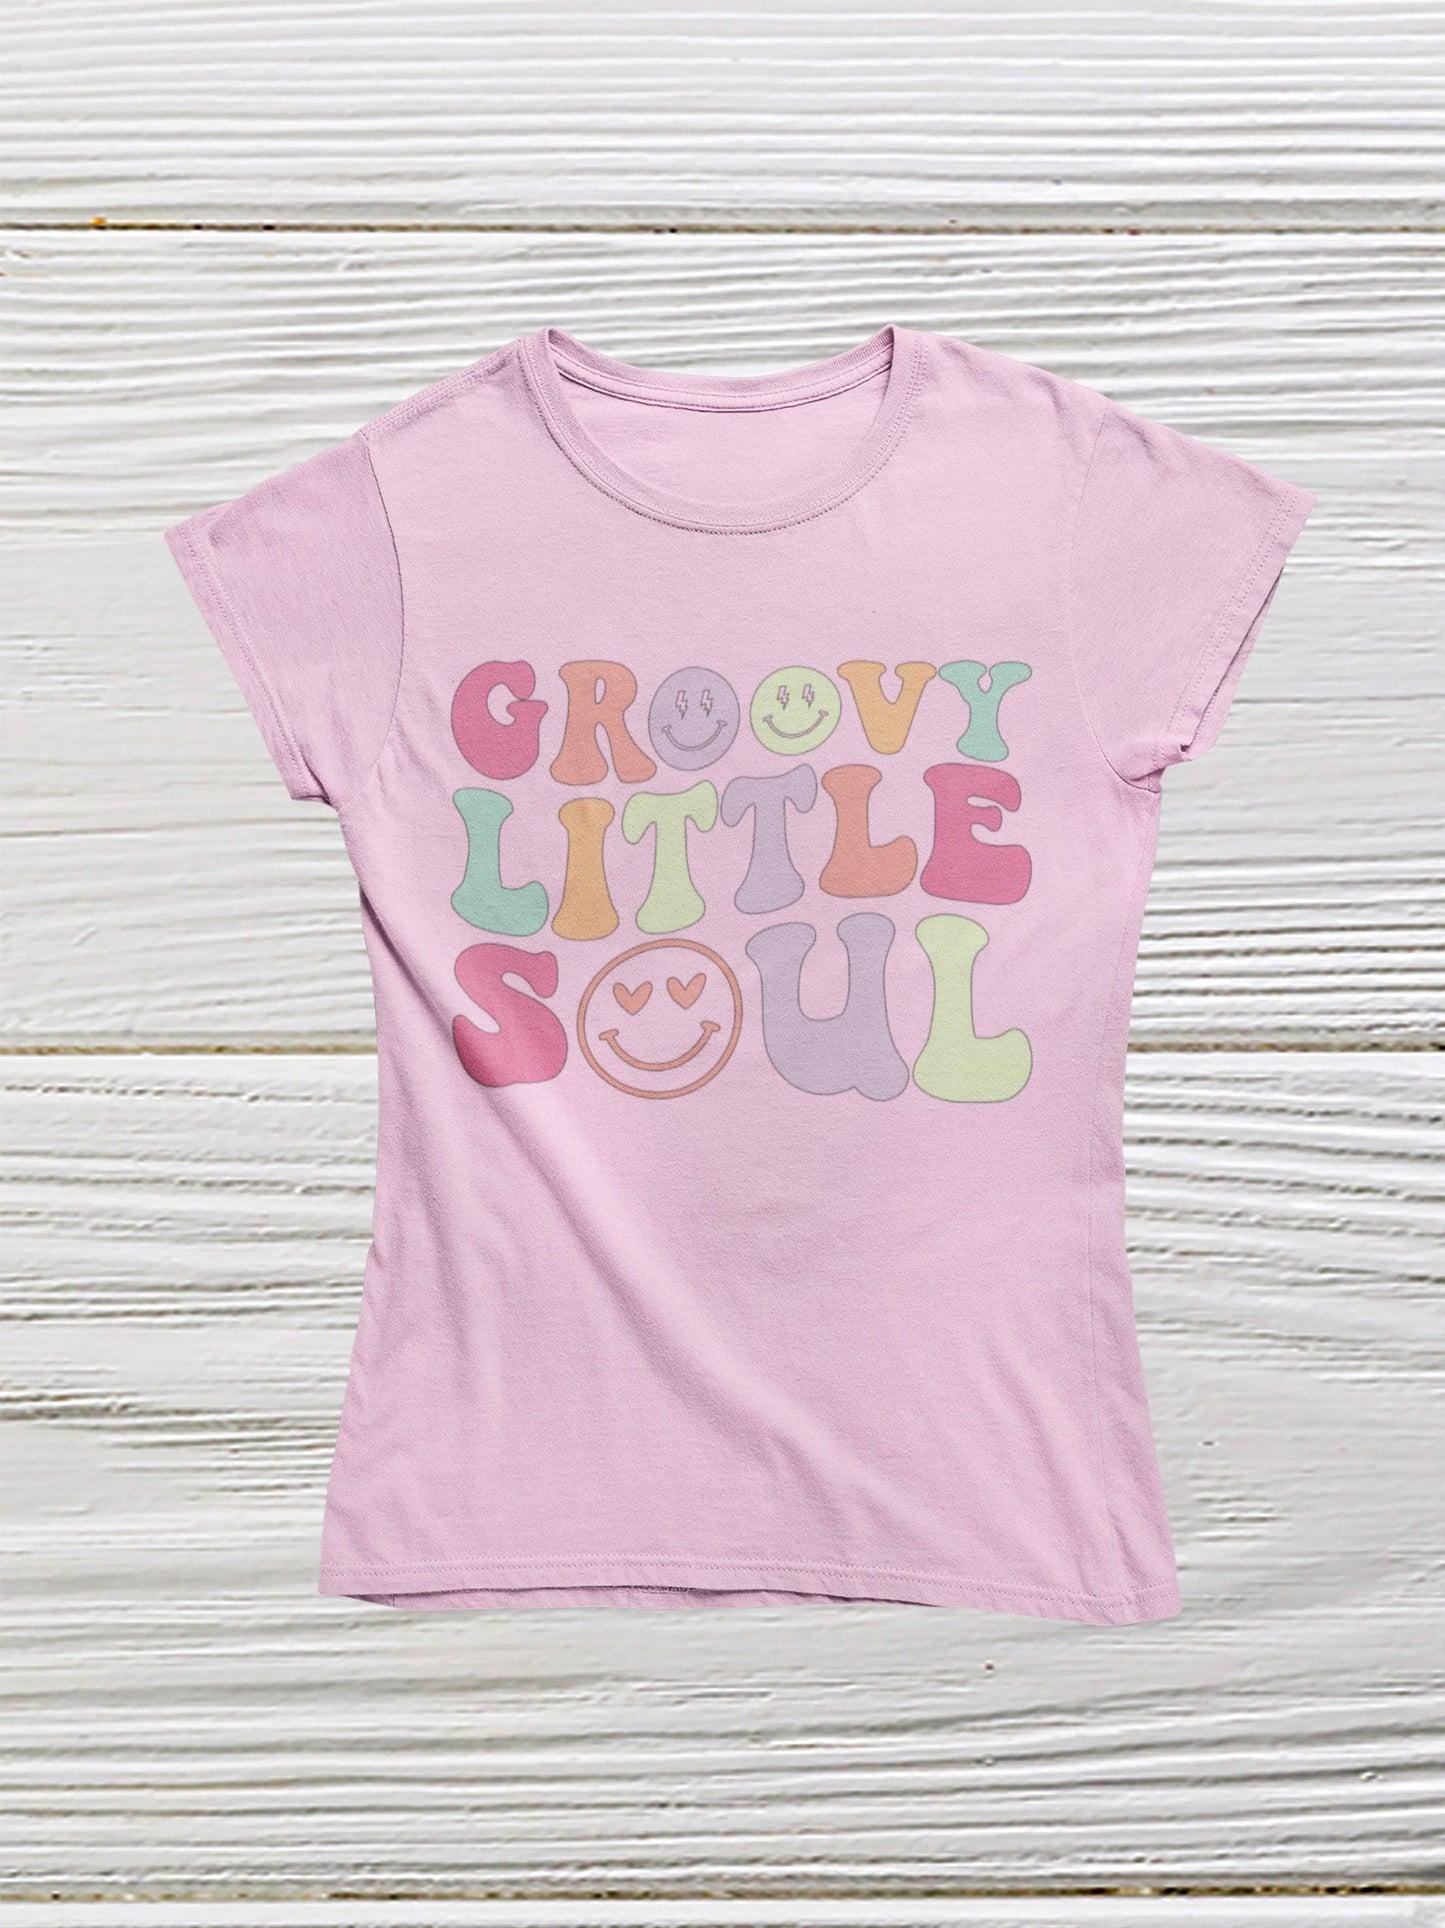 Groovy shirt  in pink color 